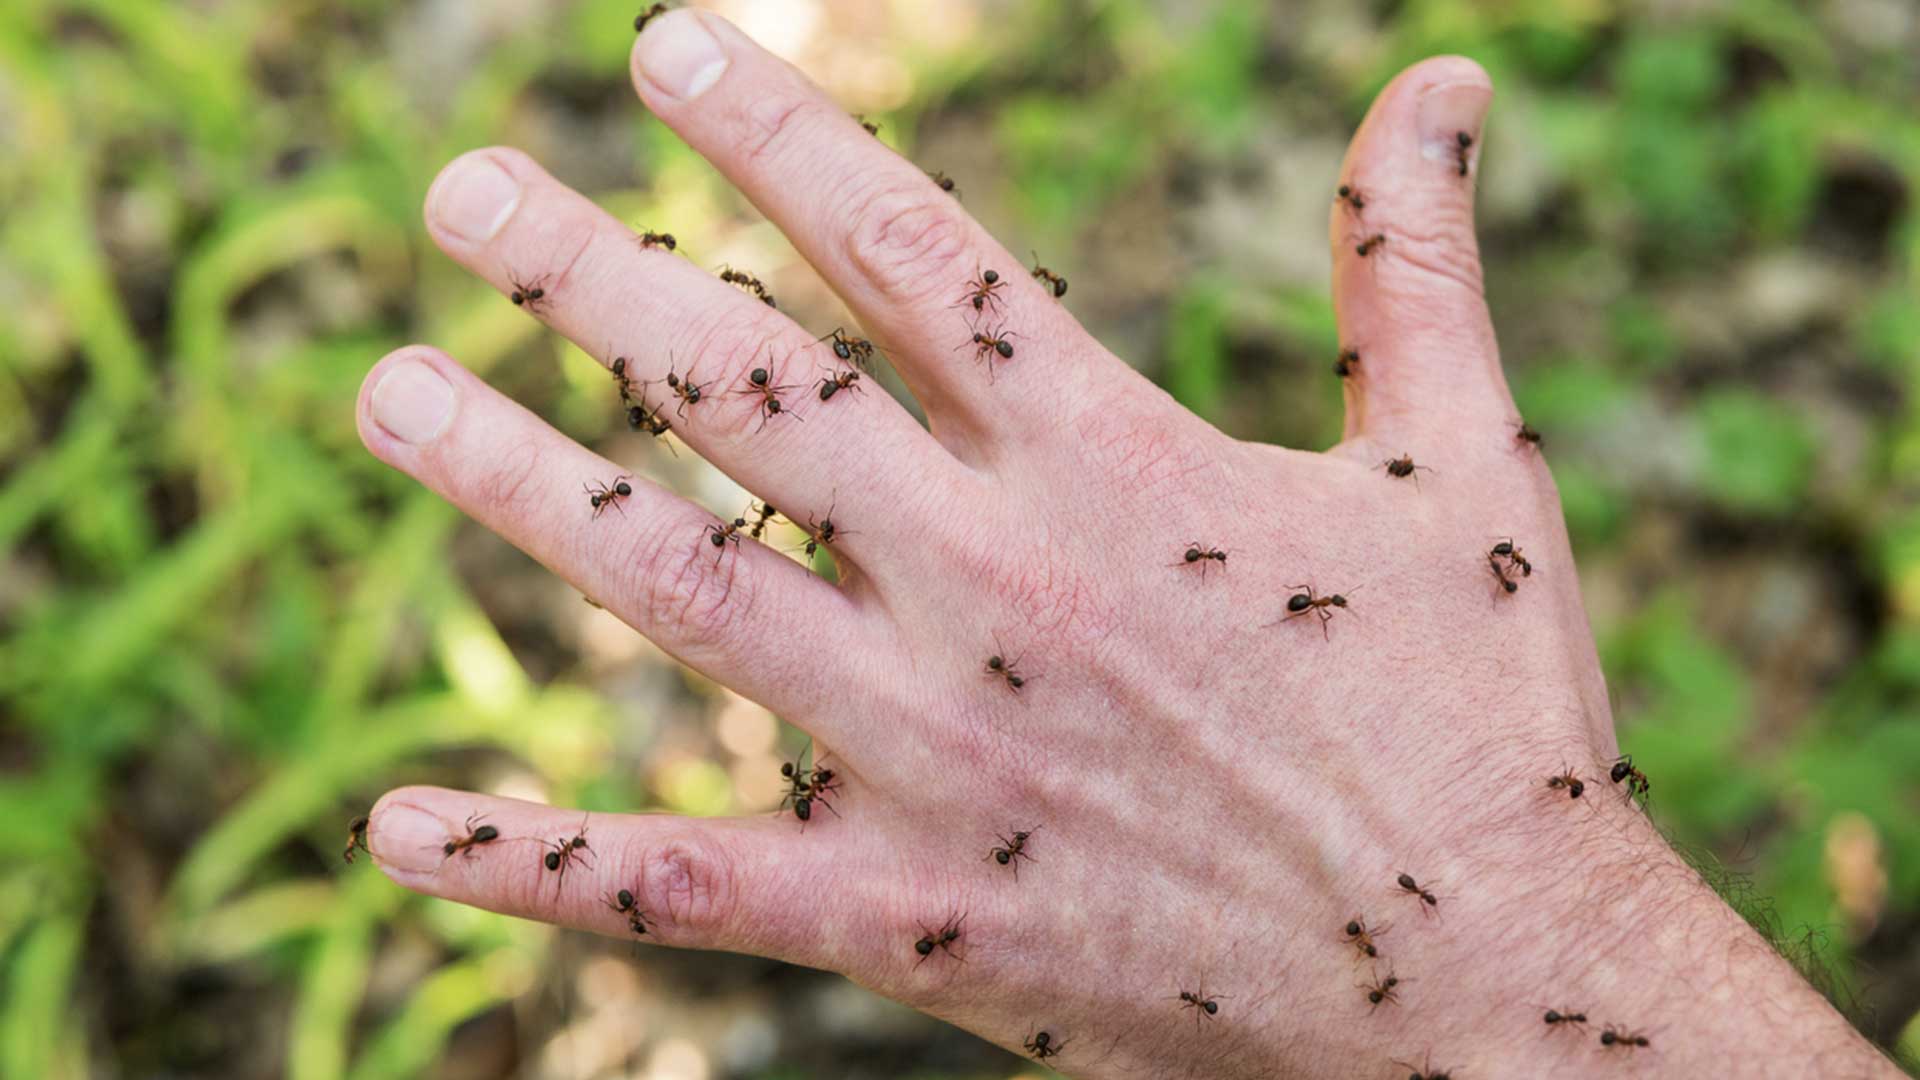 hand covered in ants